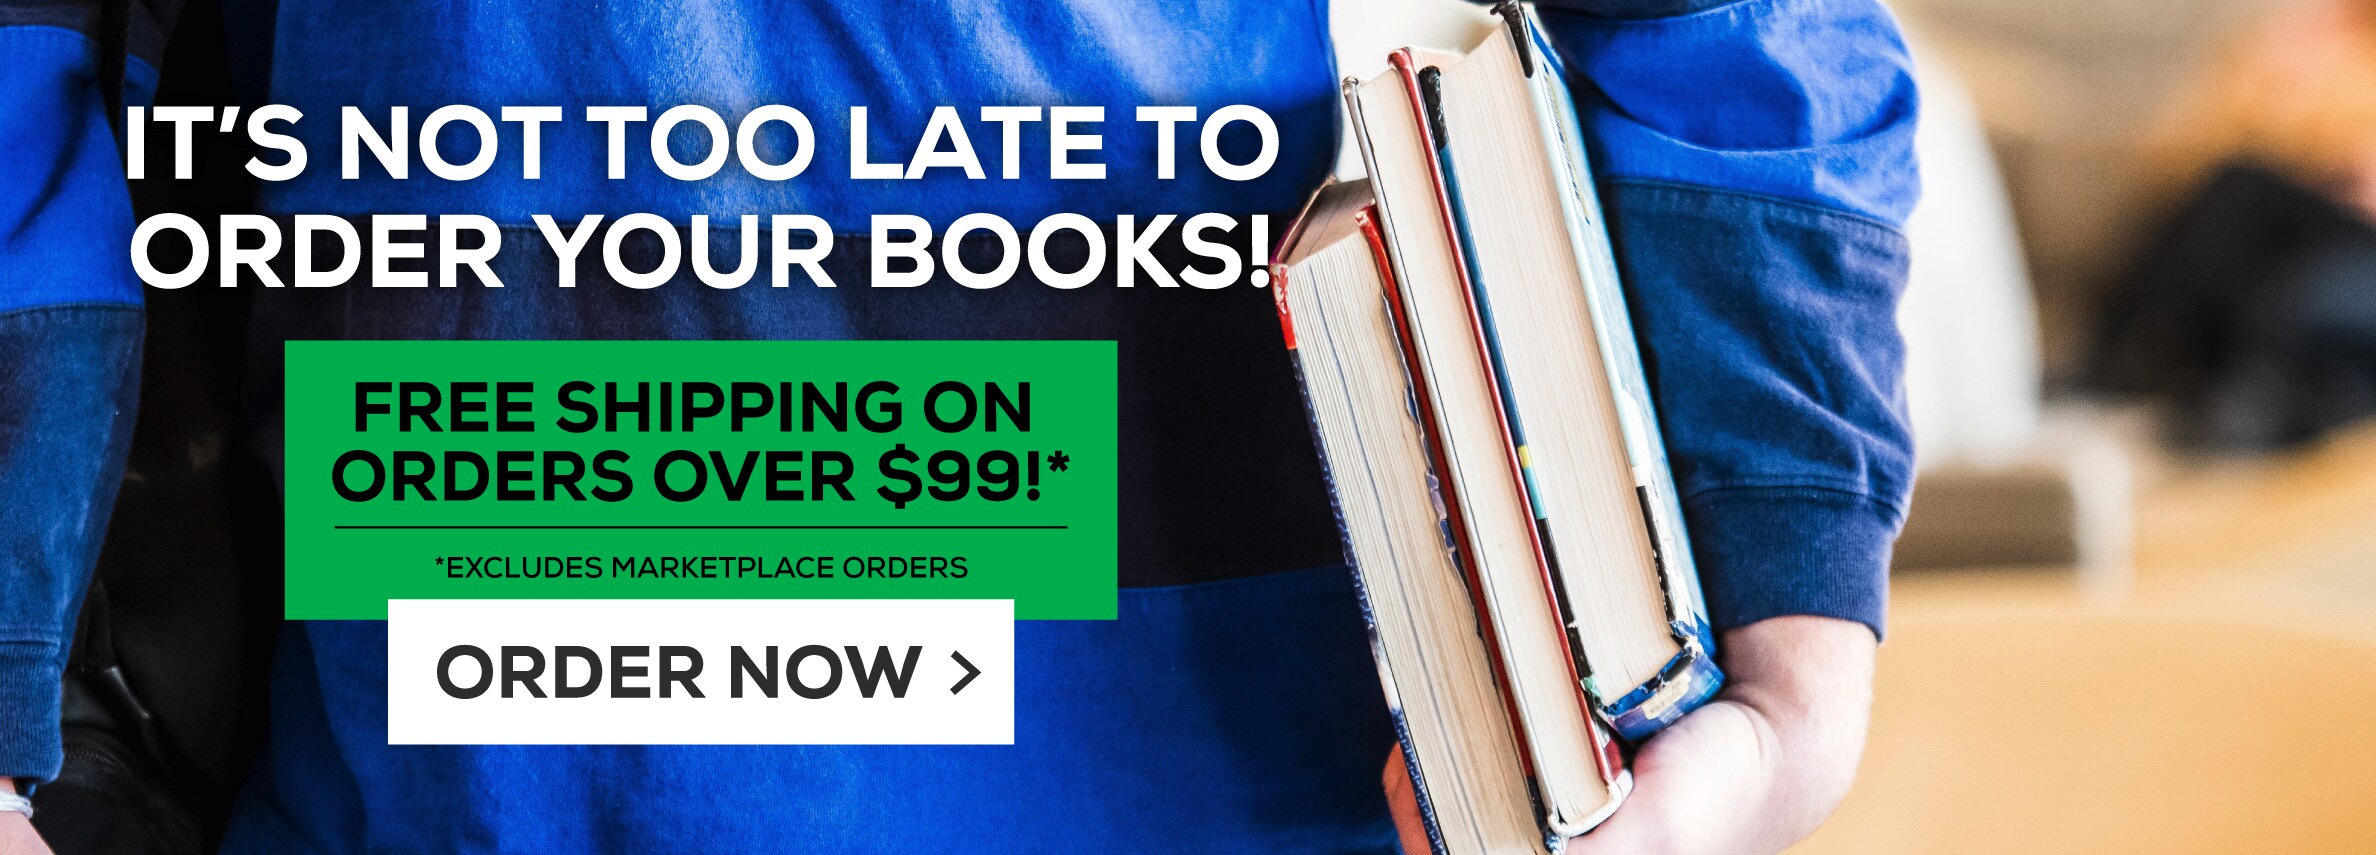 It's not too late to order your books!  Free shipping on orders over $99!* Excludes marketplace purchases. Order Now.